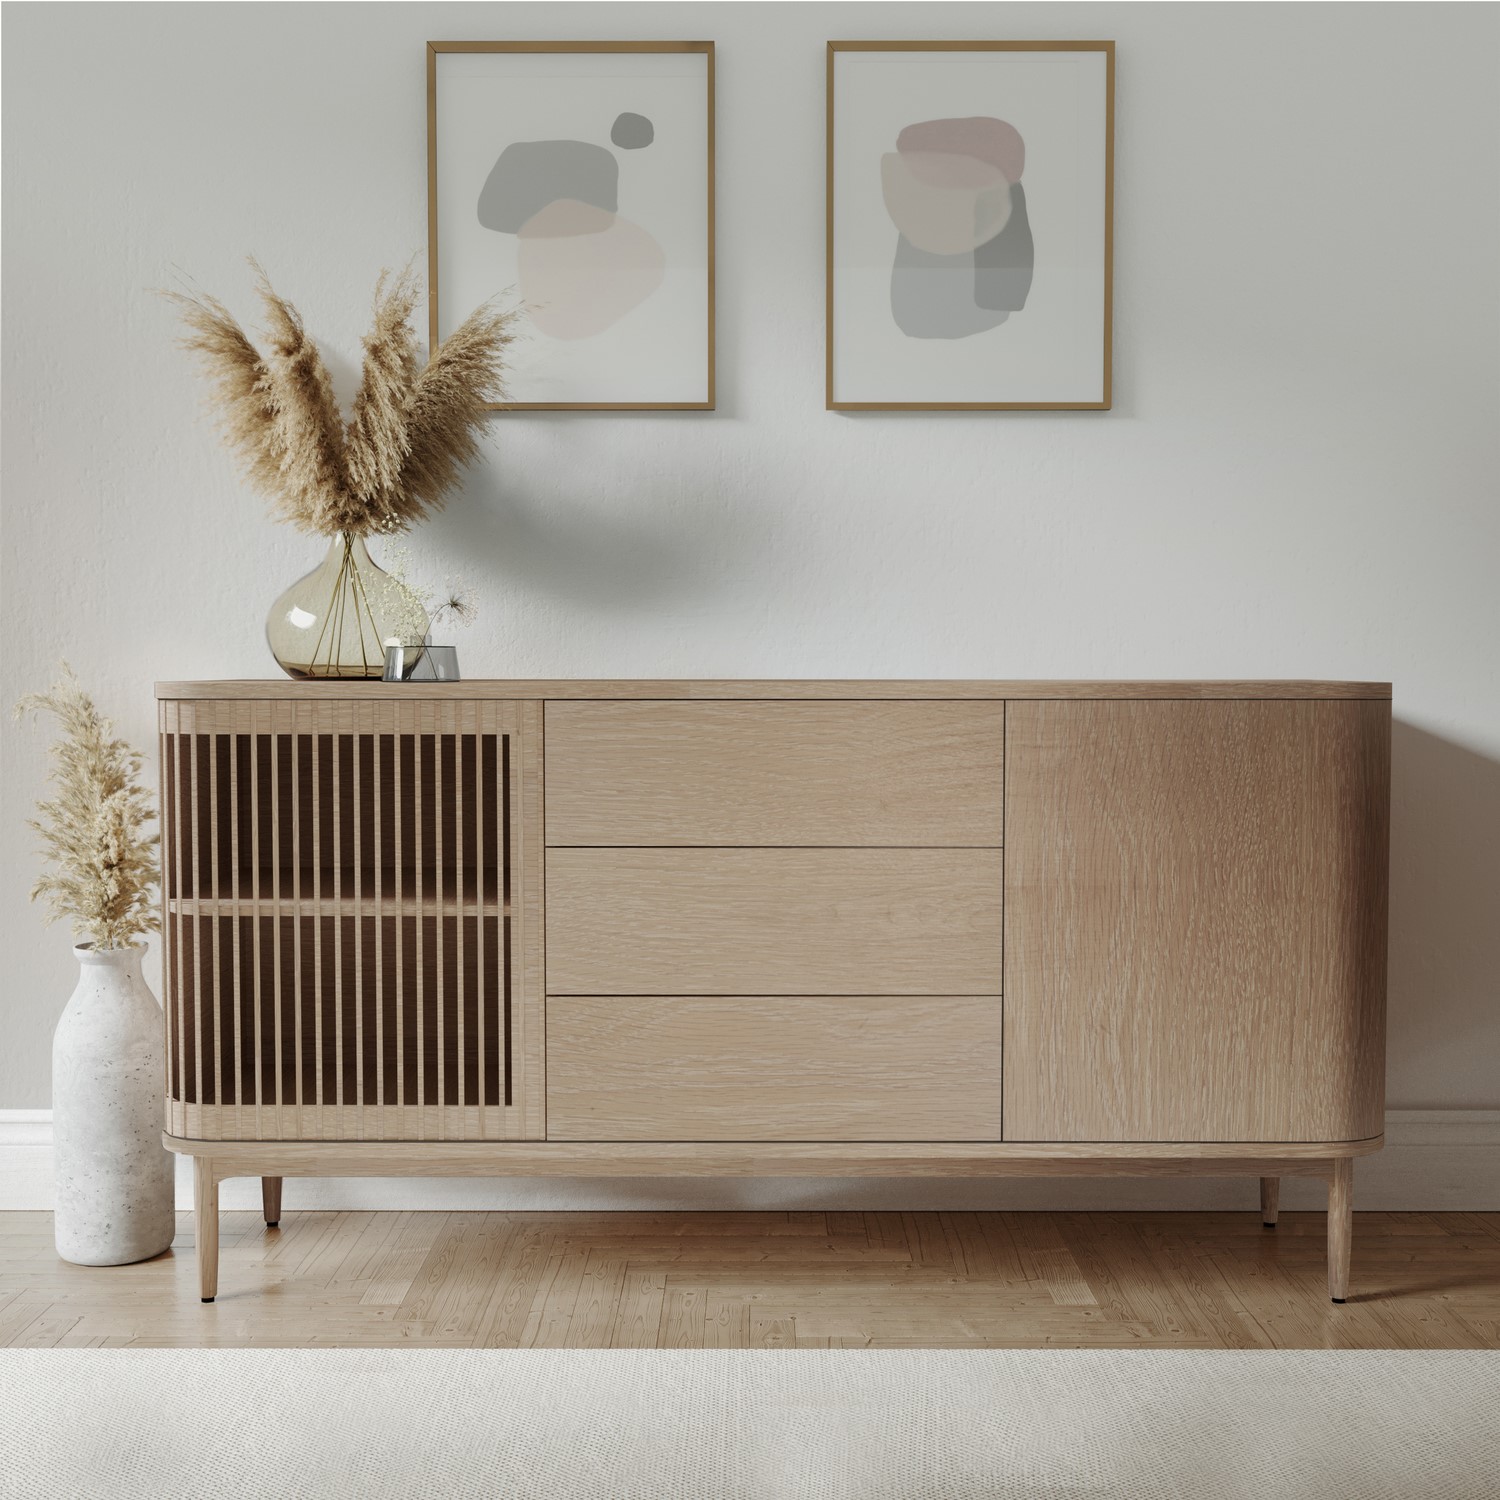 Read more about Large light oak sideboard with drawers jarel